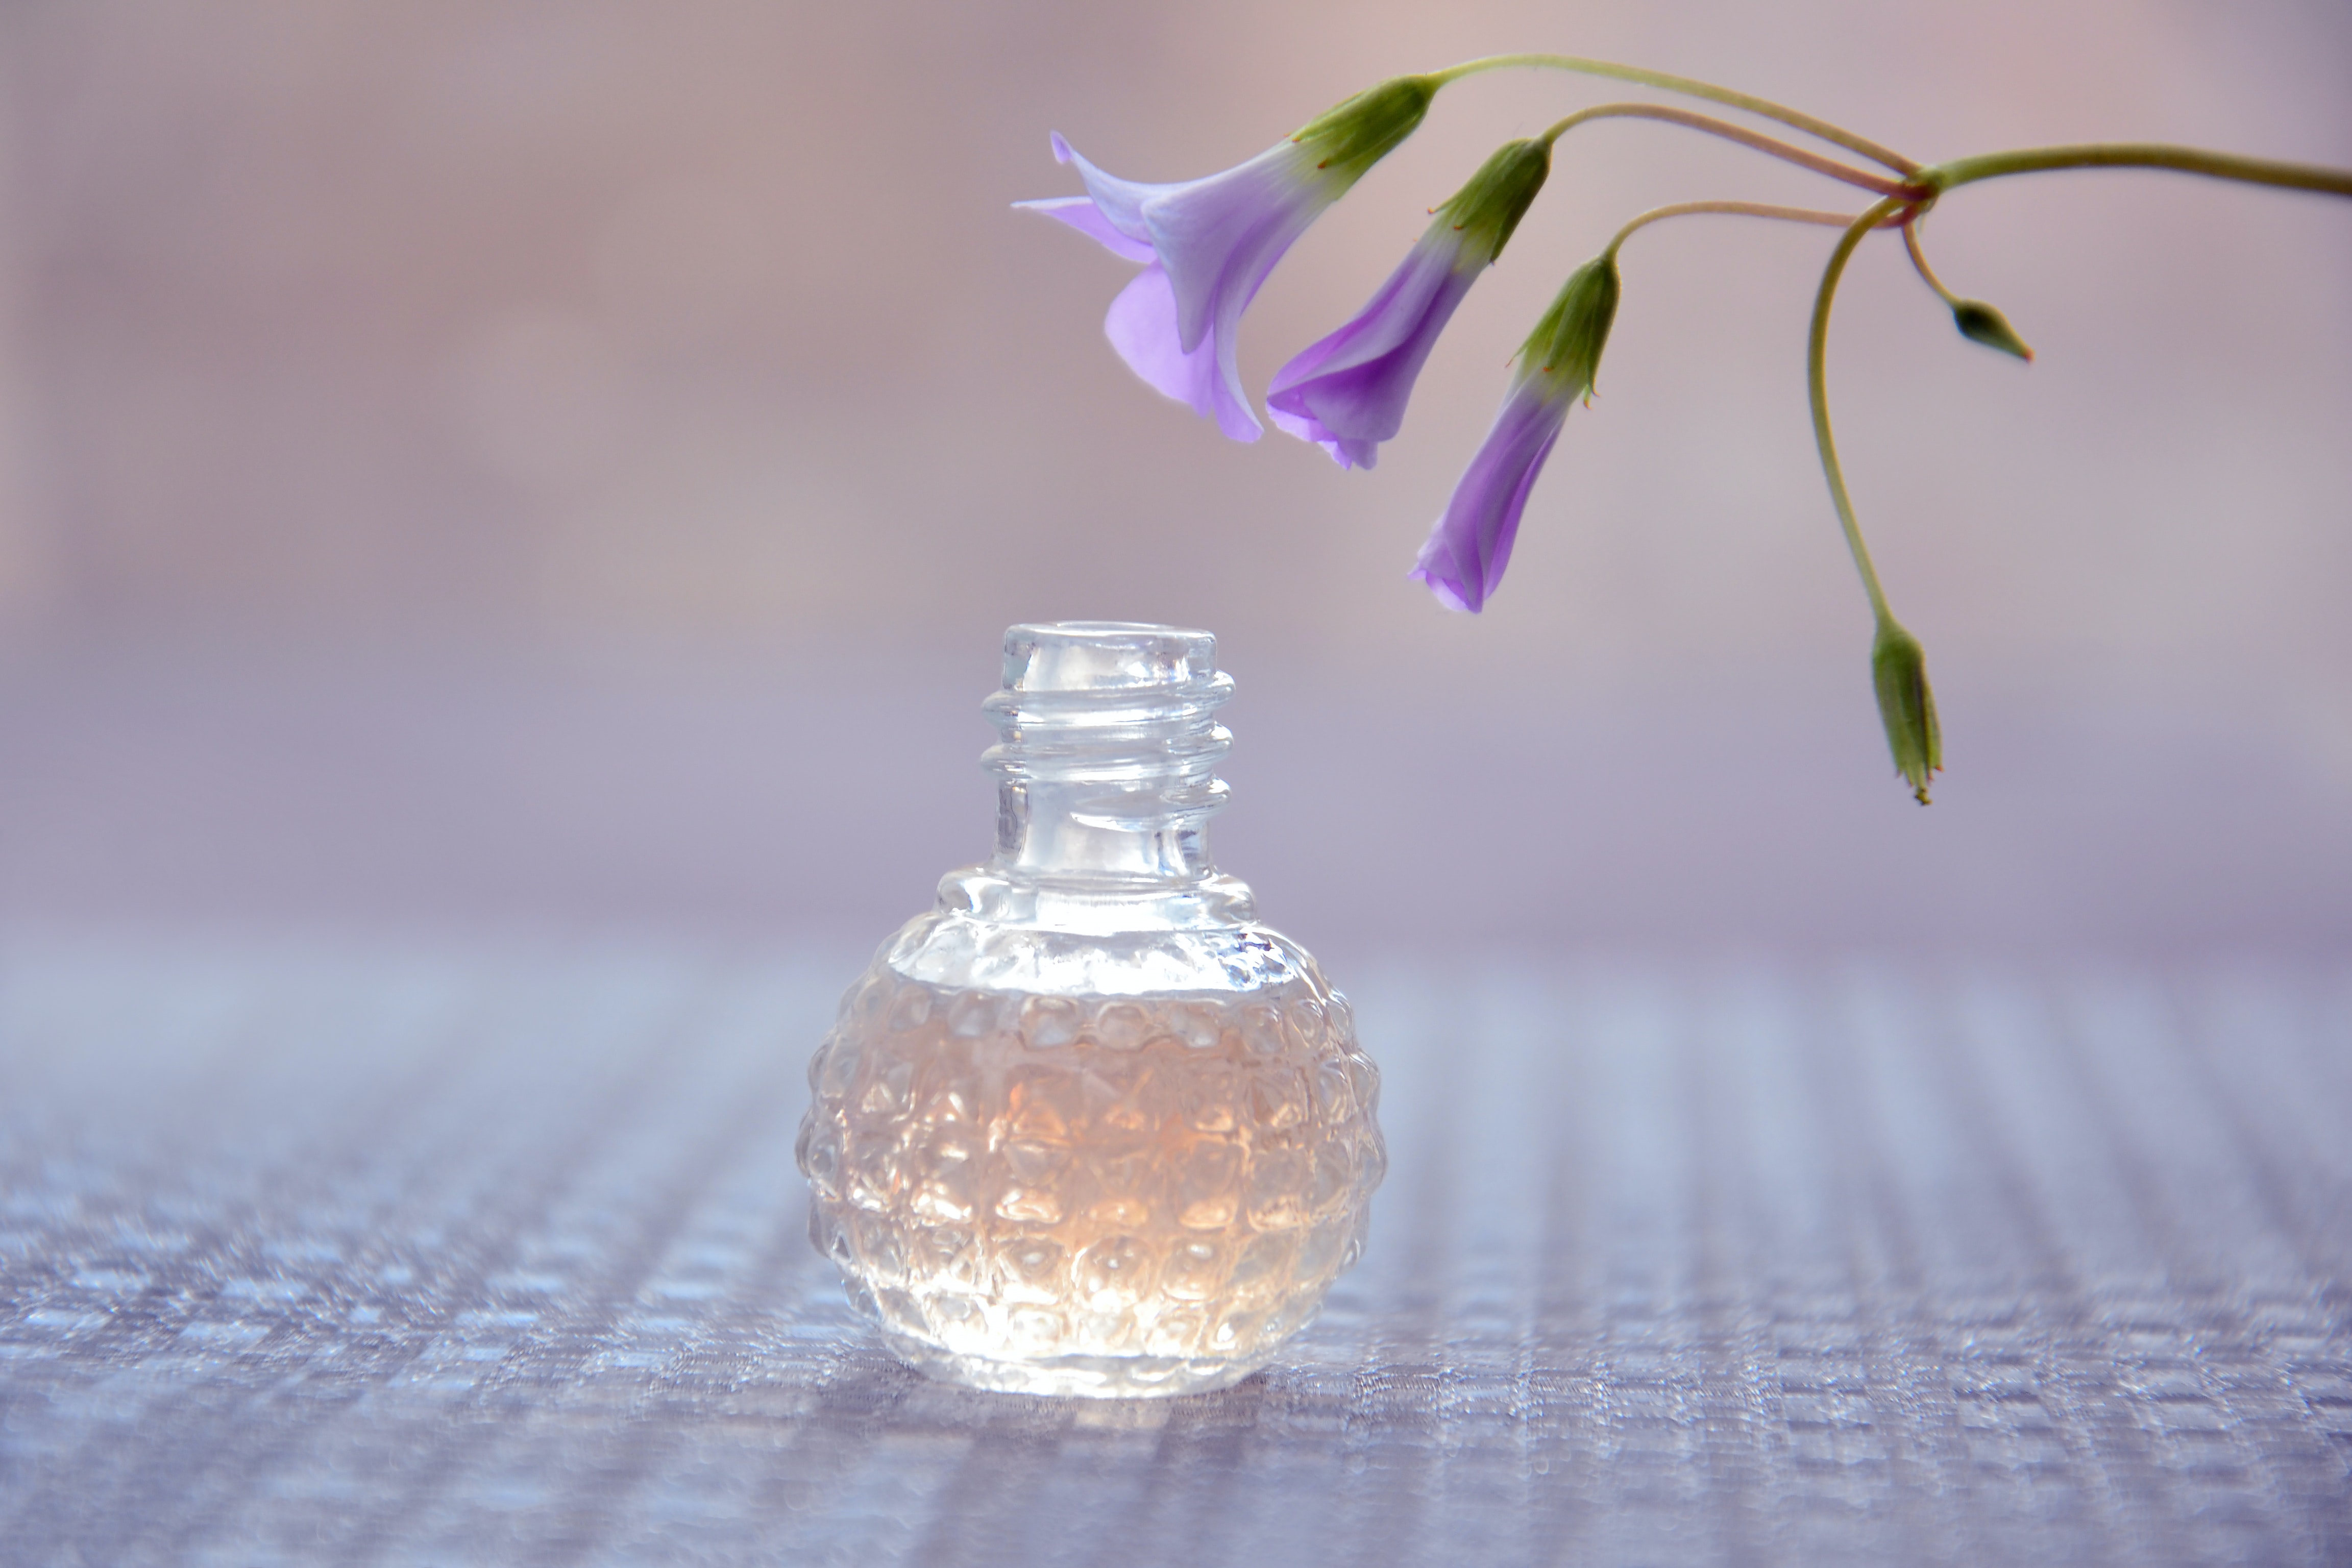 How to Make Your Own Perfume